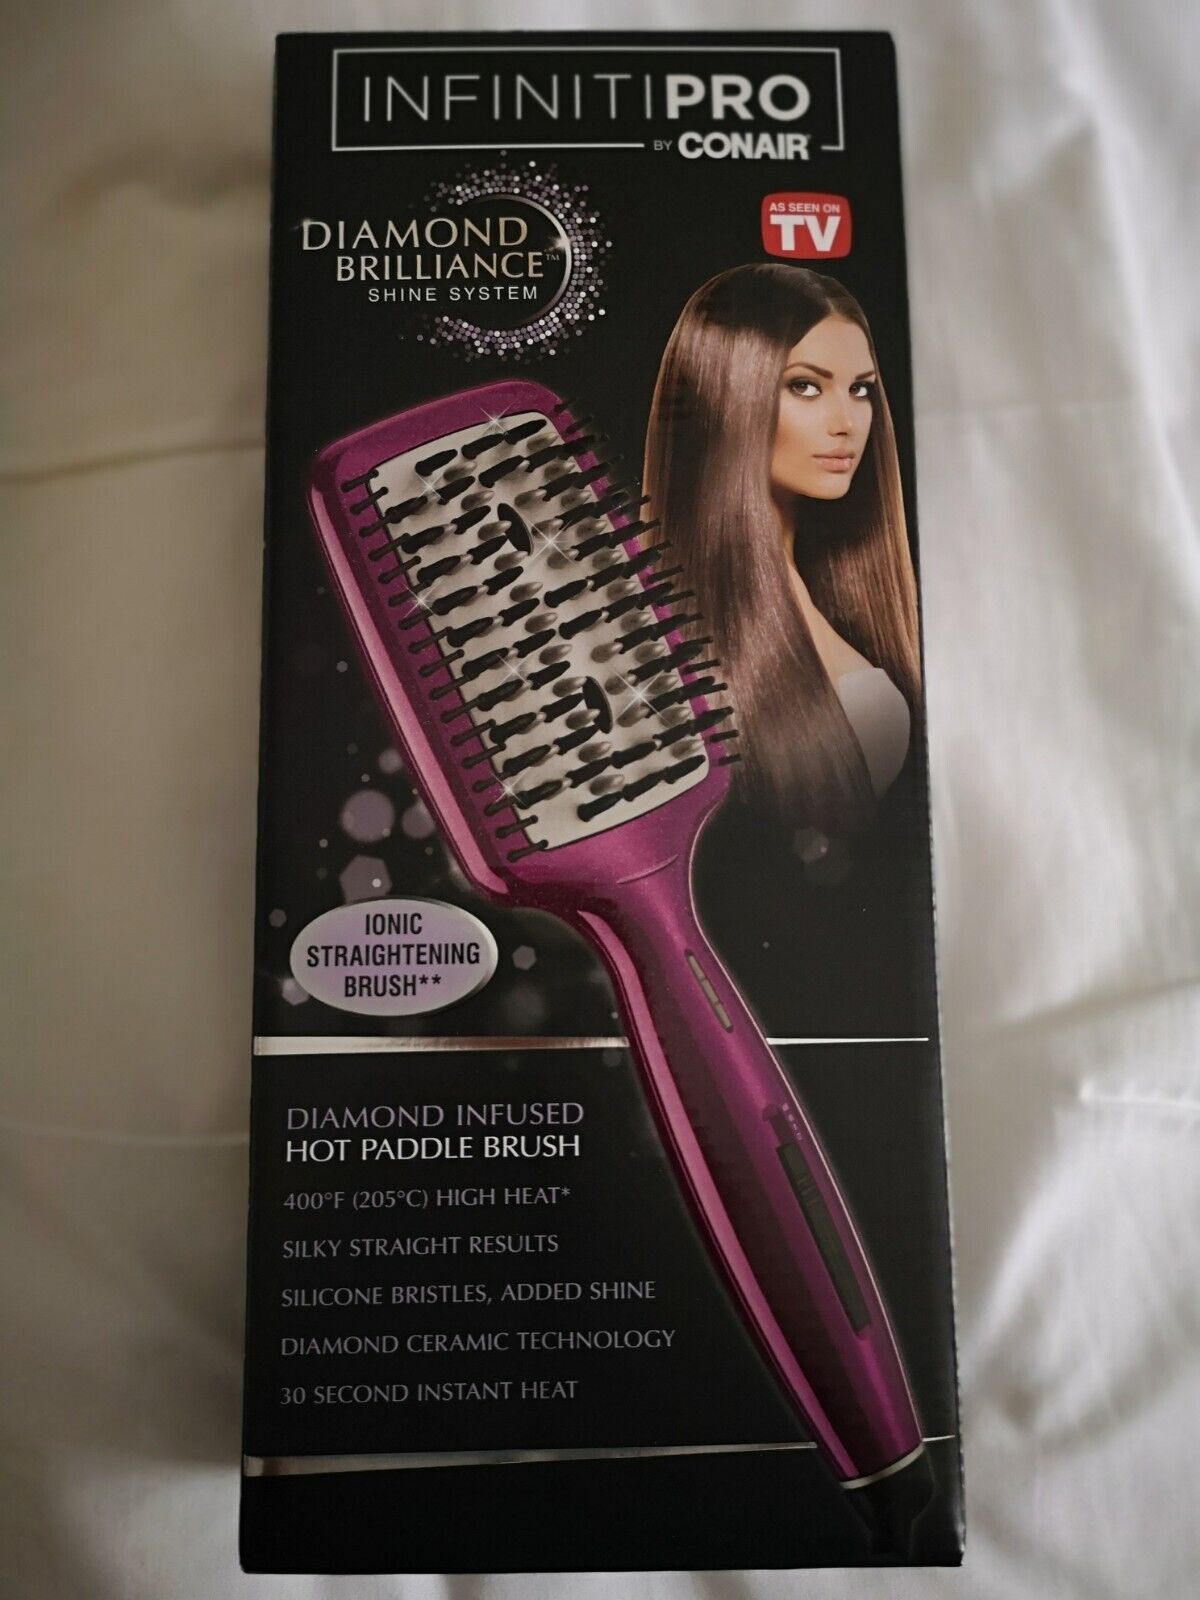 InfinitiPro By Conair Ionic Straightening Brush Includes heat mat.